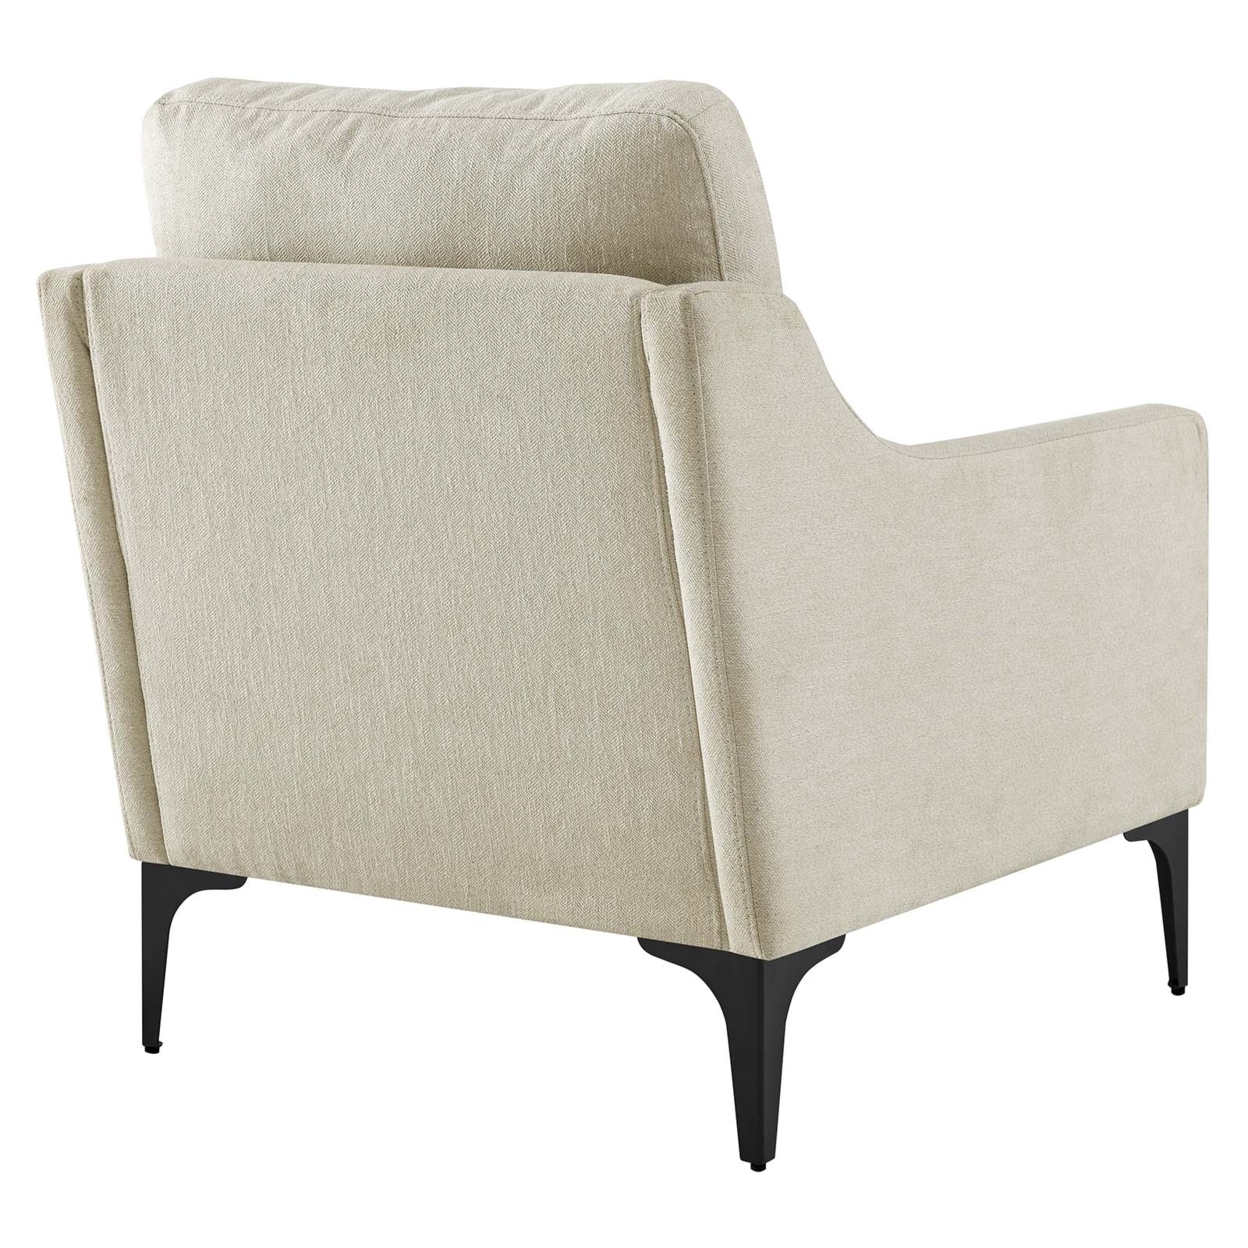 Corland Upholstered Fabric Armchair, Beige